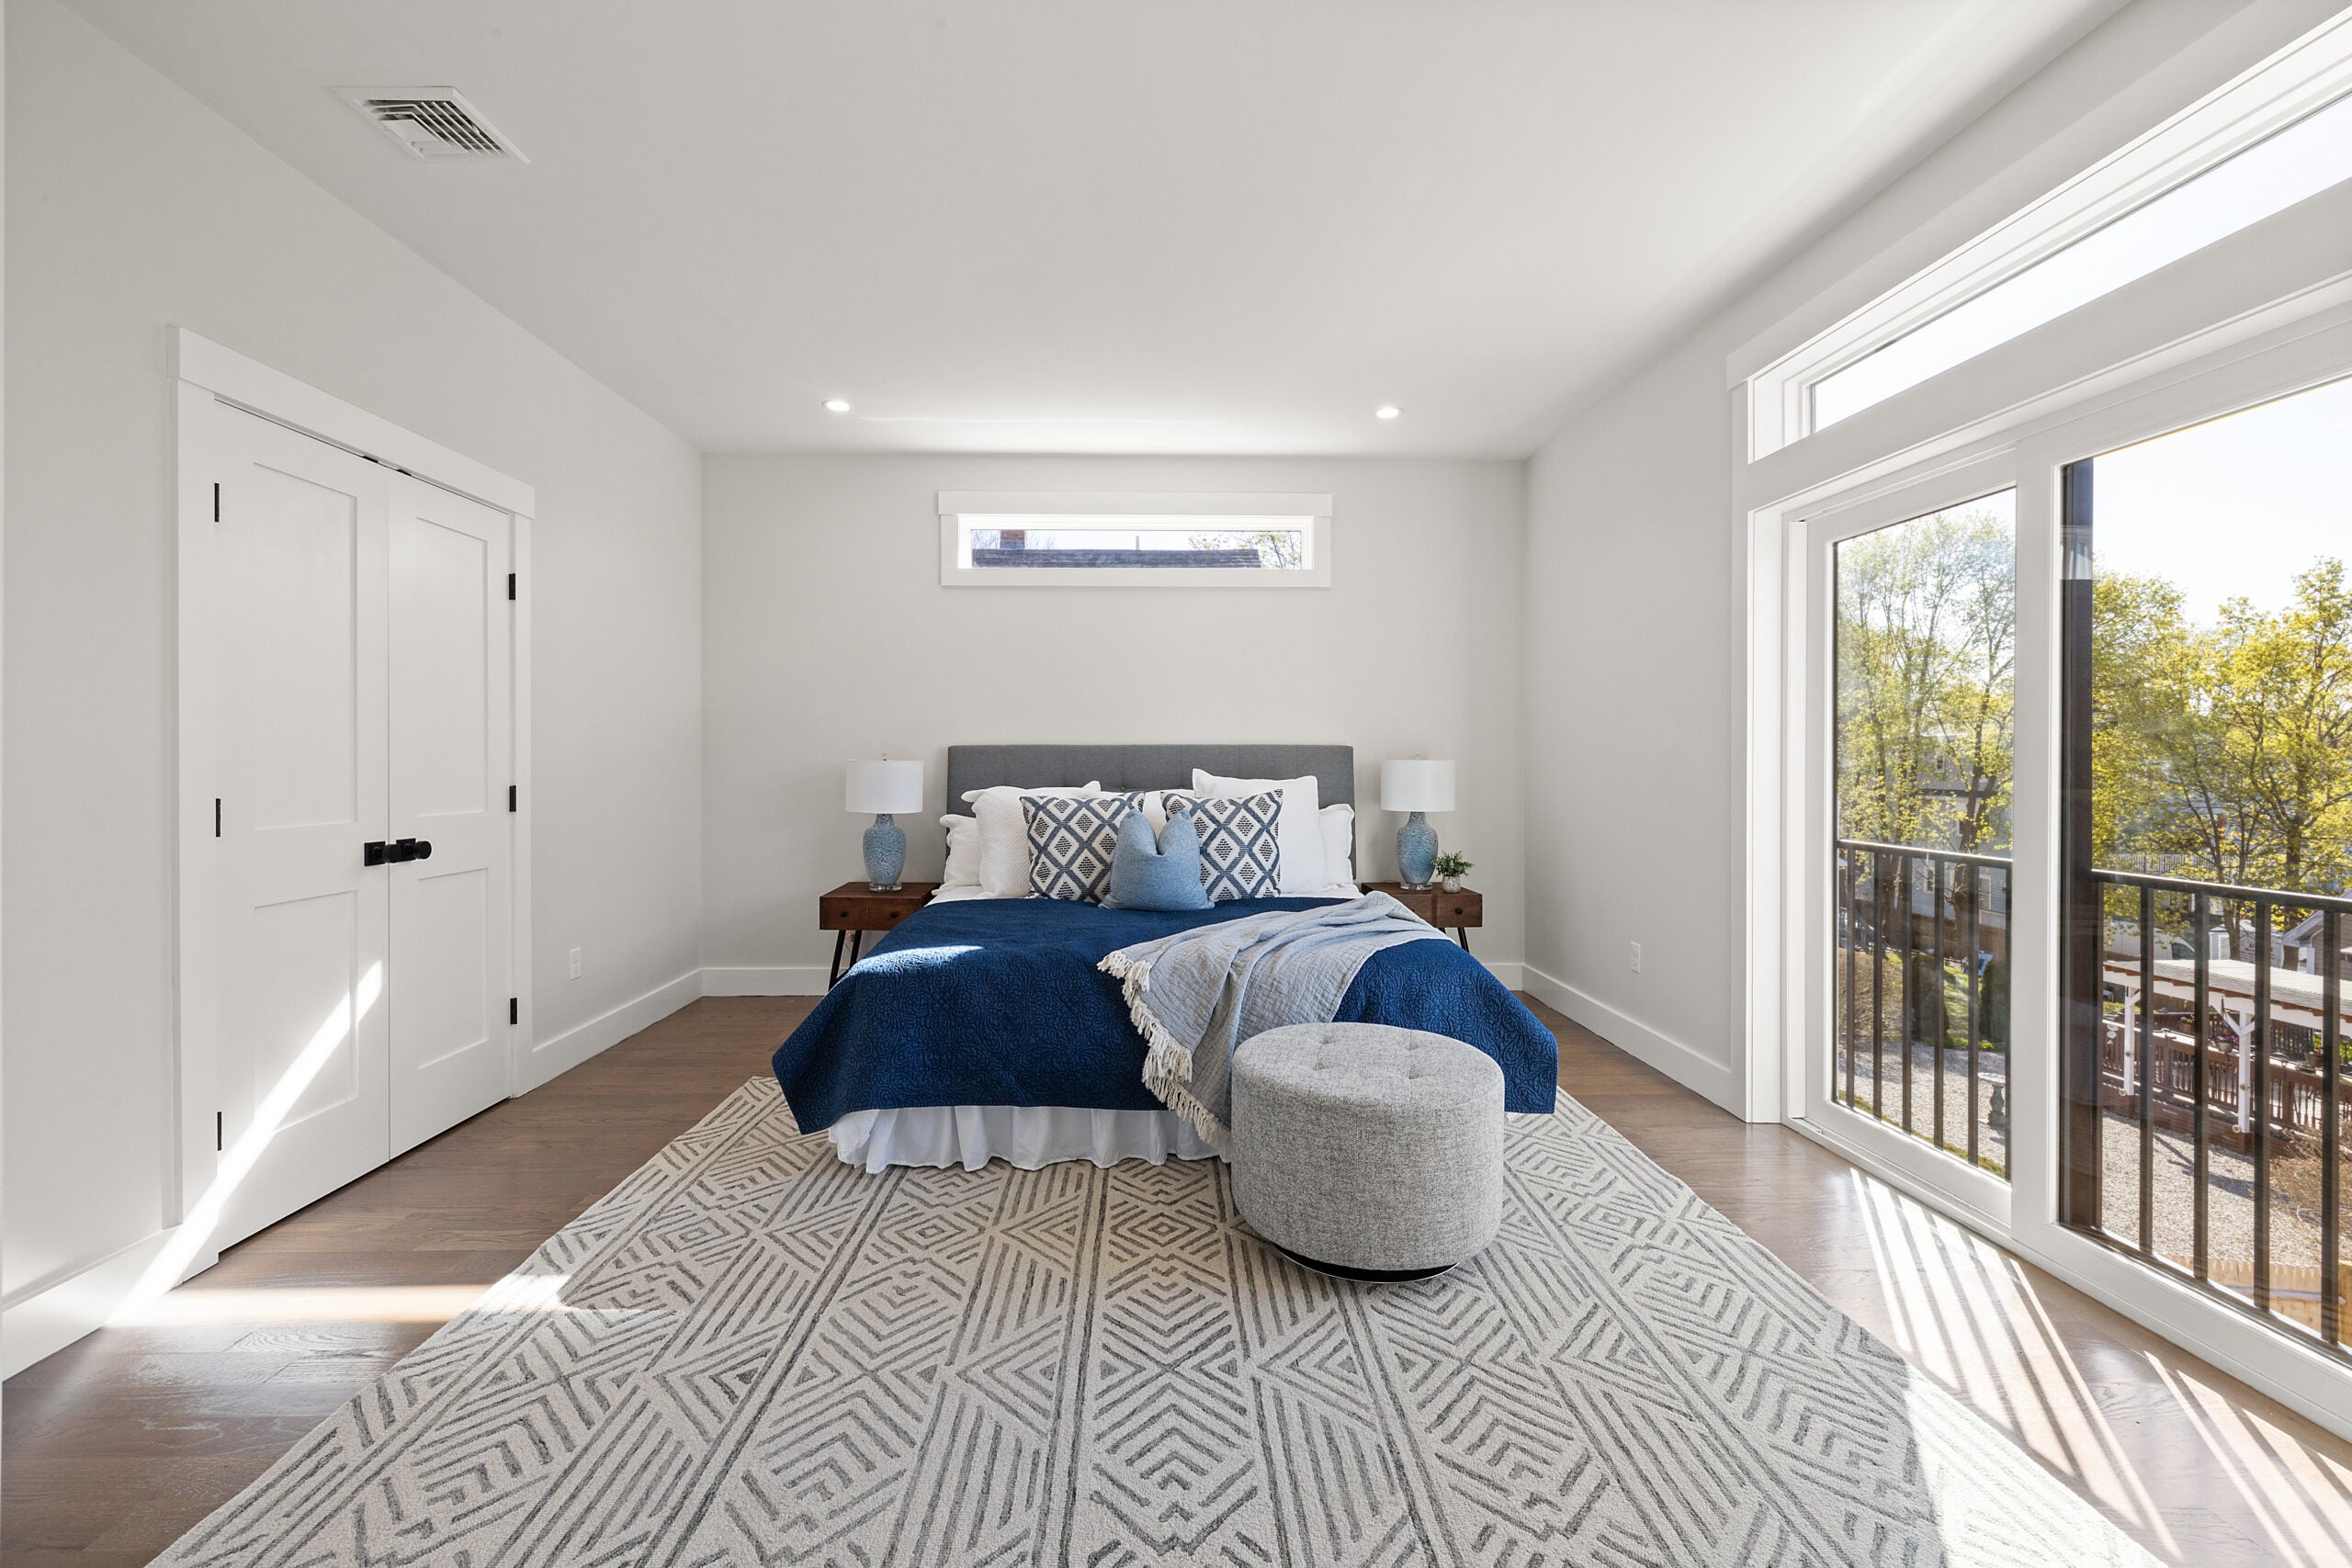 A view of a room with wood flooring, sliders to a Juliet balcony with an iron railing, two casement windows, a gray-and-white patterned area rug, recessed lighting, and soft-gray walls. A king-sized bed with a blue bedspread, a white dust ruffle, and a mix of white and gray pillows sits in the back ground under a casement window. Two night stands with jade-colored lamps flank it. Home of the Week in Mattapan.